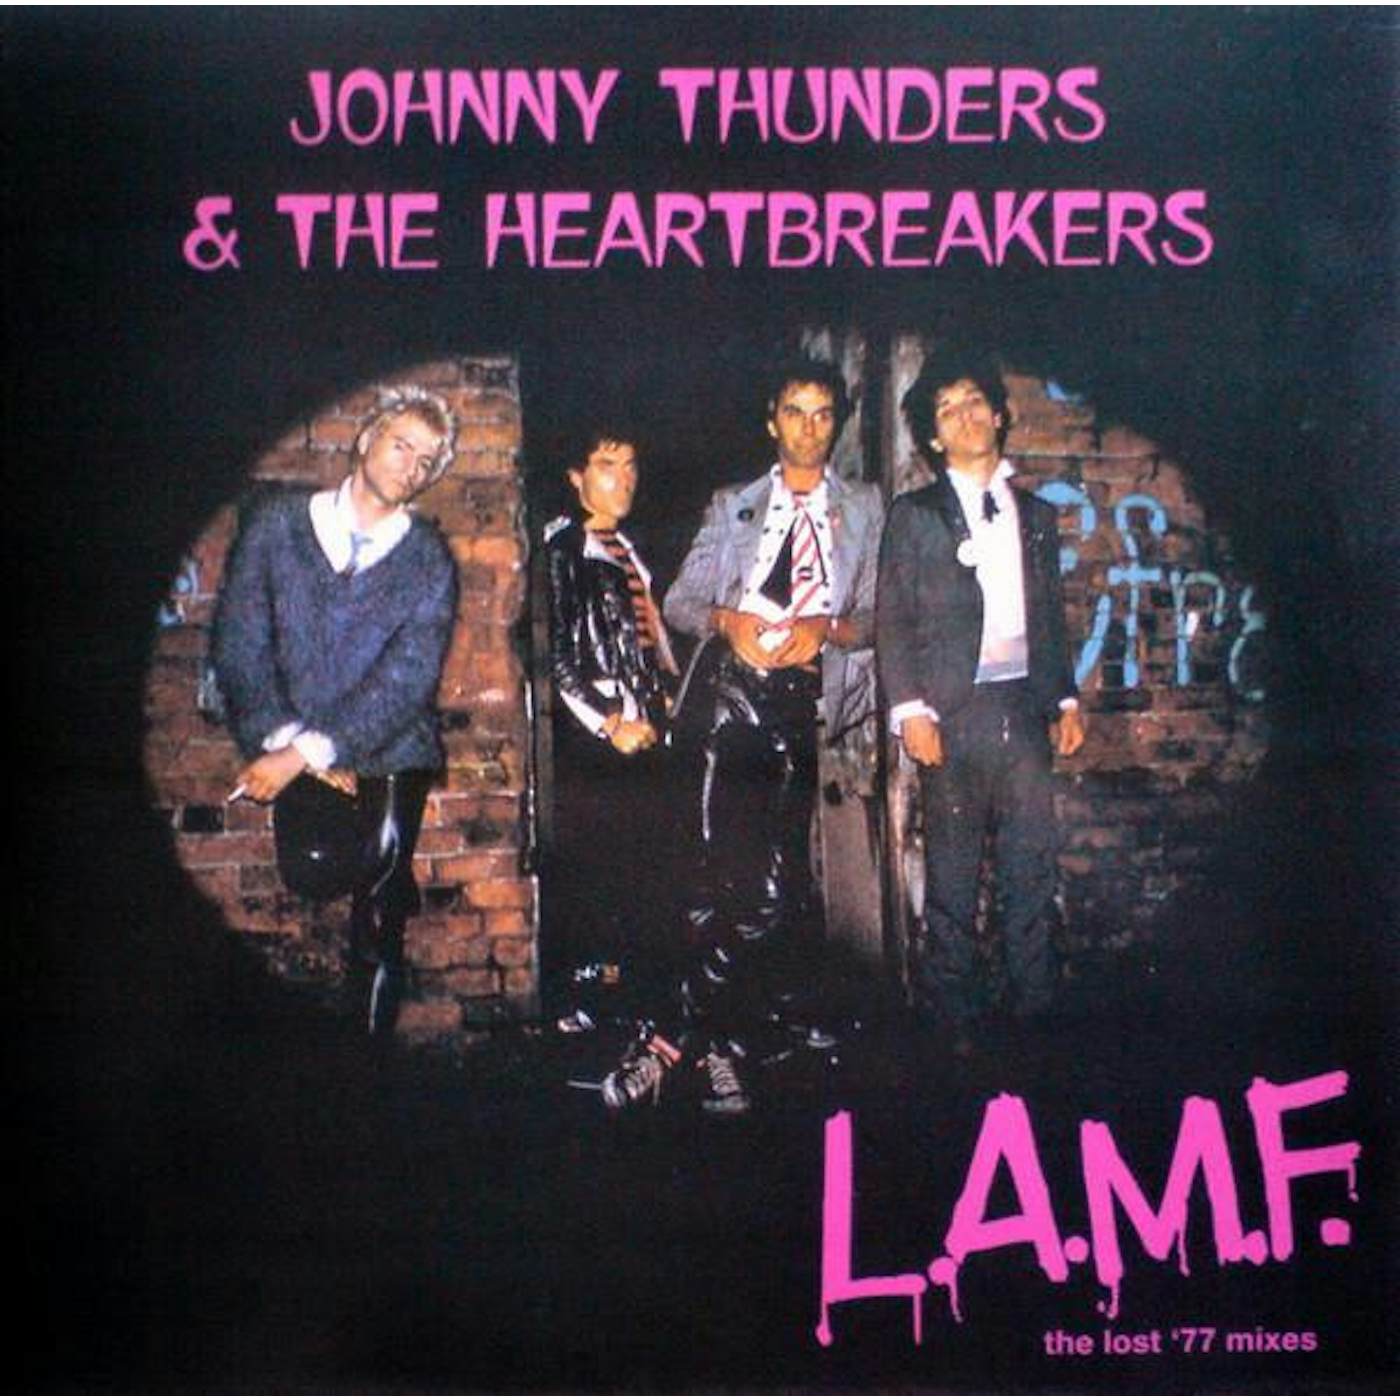 Johnny Thunders & The Heartbreakers L.A.M.F.: THE LOST '77 MIXES Vinyl Record